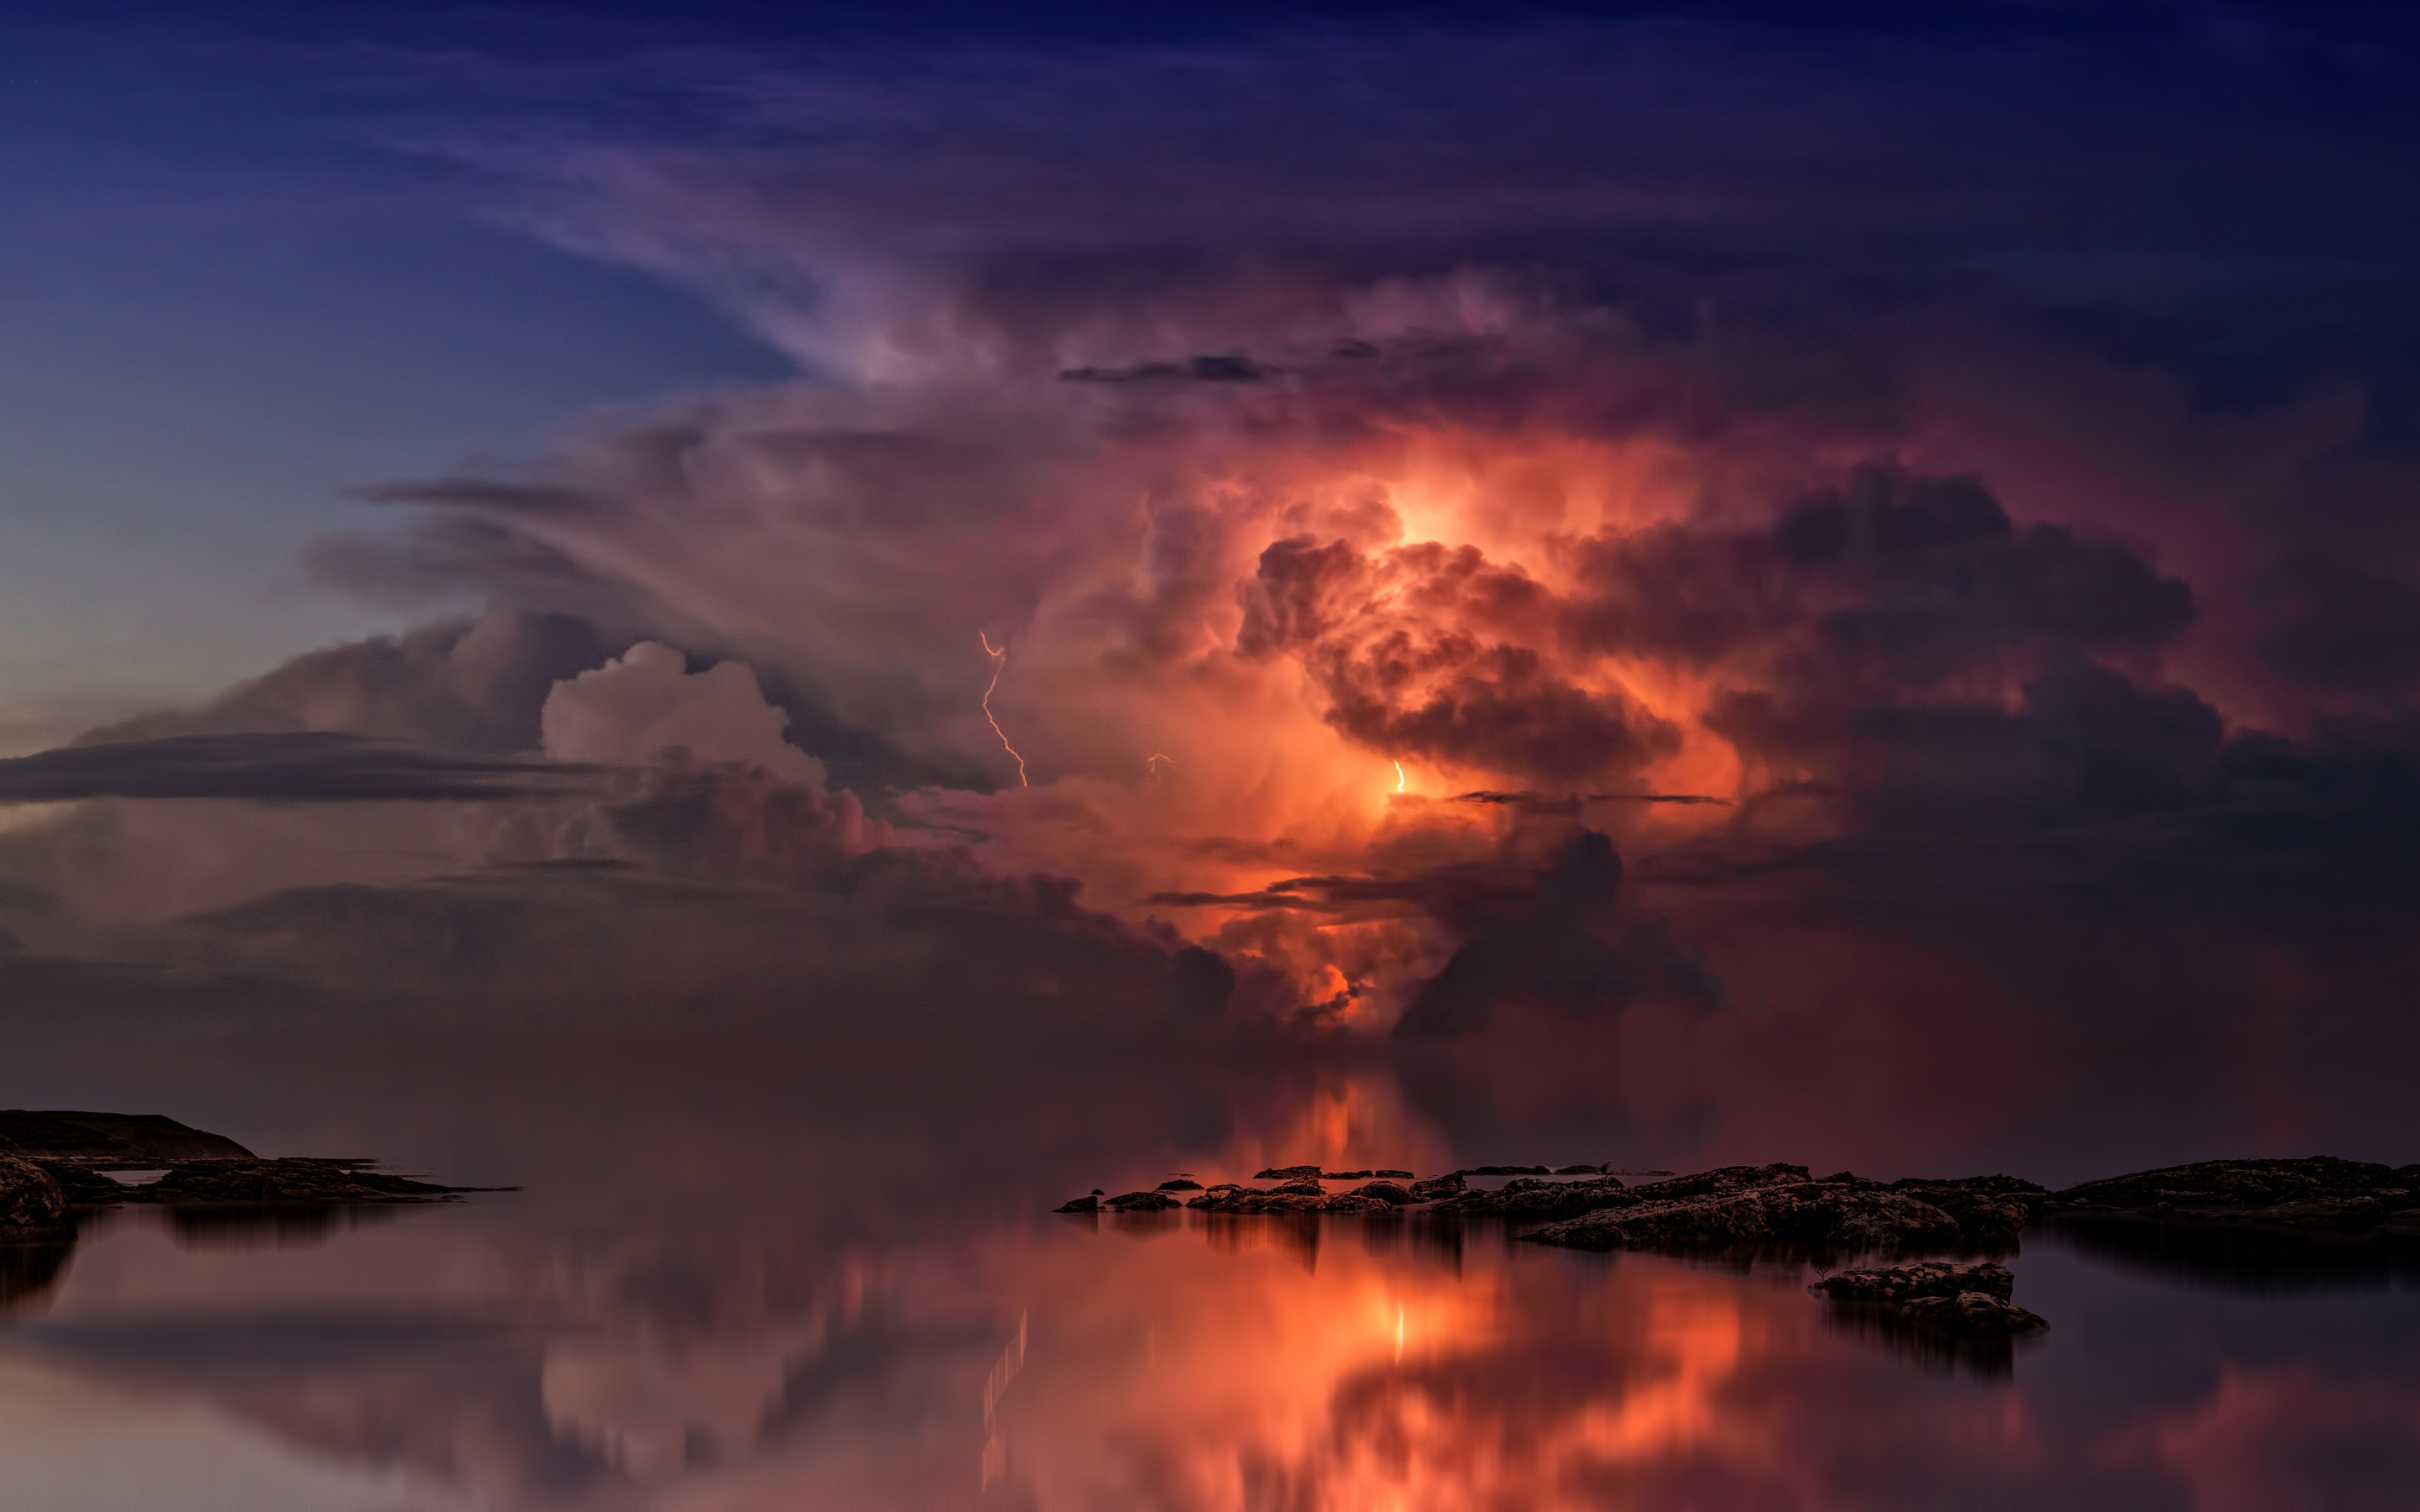 Thunderstorm, dense clouds, sea, reflections, sky, 2880x1800 wallpaper